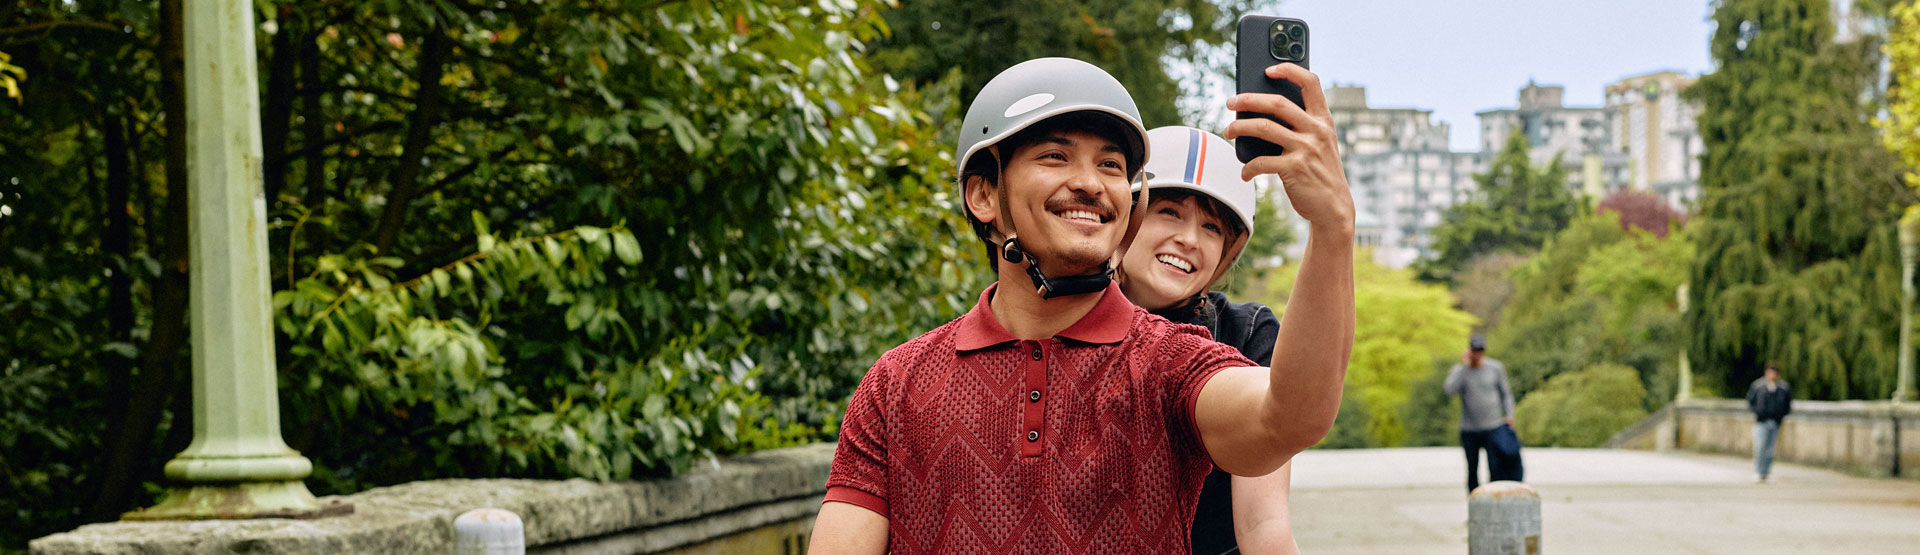 Young couple outside in a cityscape, wearing bike helmets and taking a selfie.